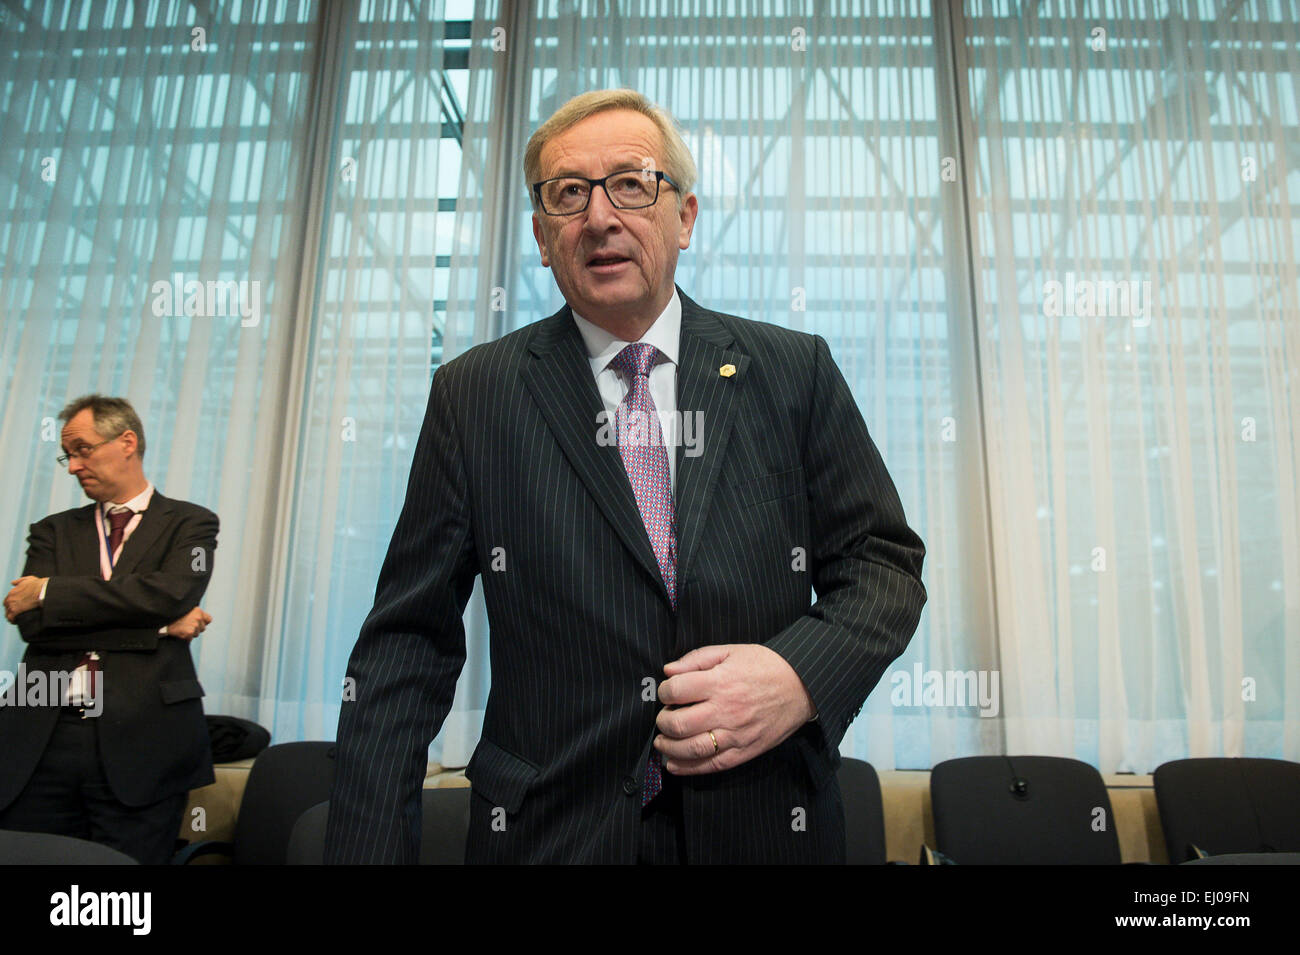 Jean-Claude Juncker, the president of the European Commission at the start of a Tripartite Social Summit ahead of the EU Summit in Brussels, Belgium on 19.03.2015 by Wiktor Dabkowski Stock Photo